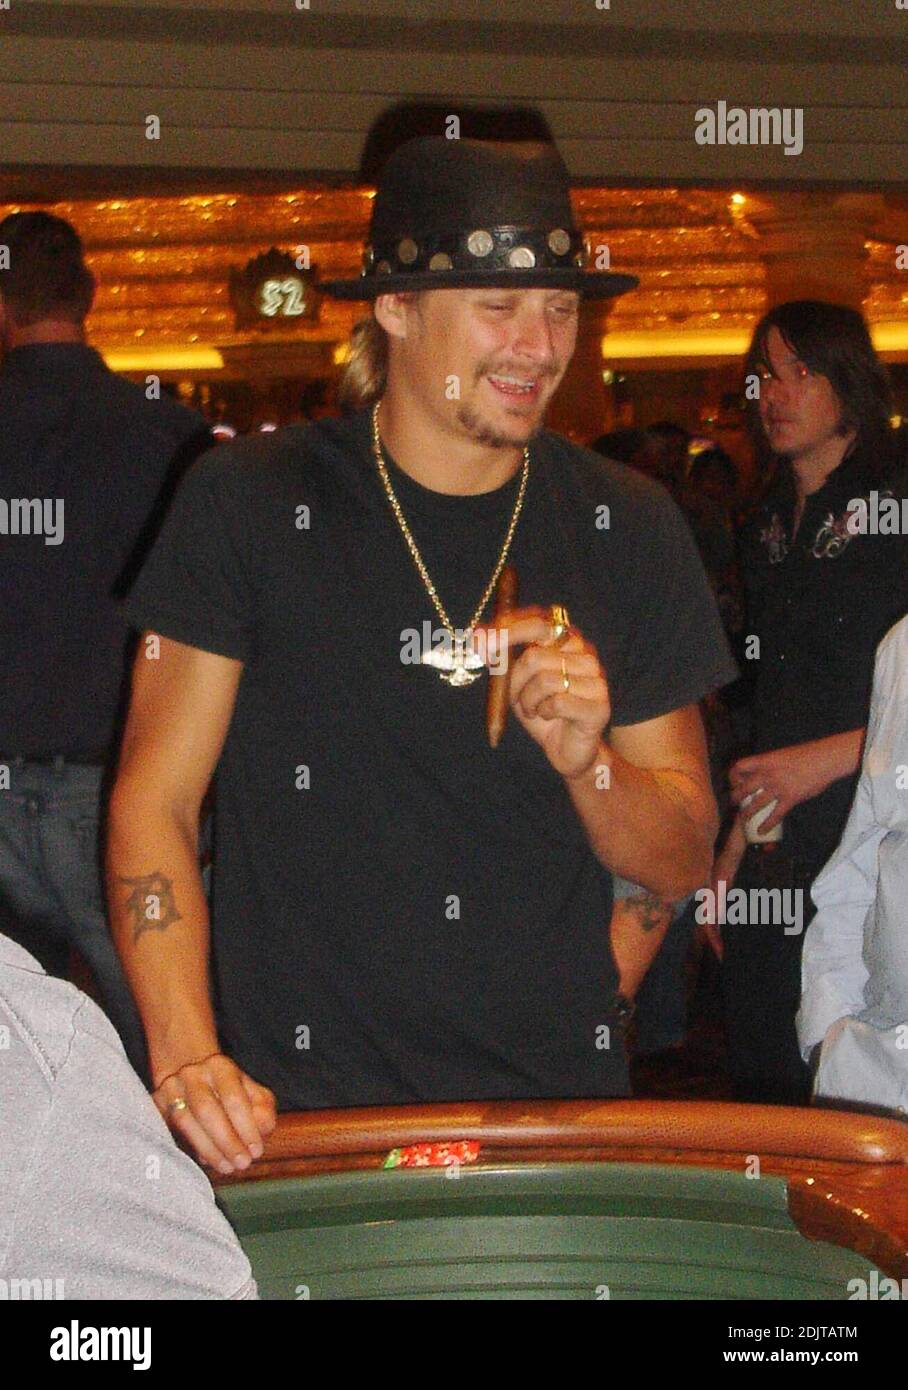 Kid Rock must be winning judging by the grin on his face as he hits the craps tables in Las Vegas, Nv. His wife Pamela Anderson, was no where to be seen after she reportedly suffered a miscarriage last week. 11/17/06 Stock Photo